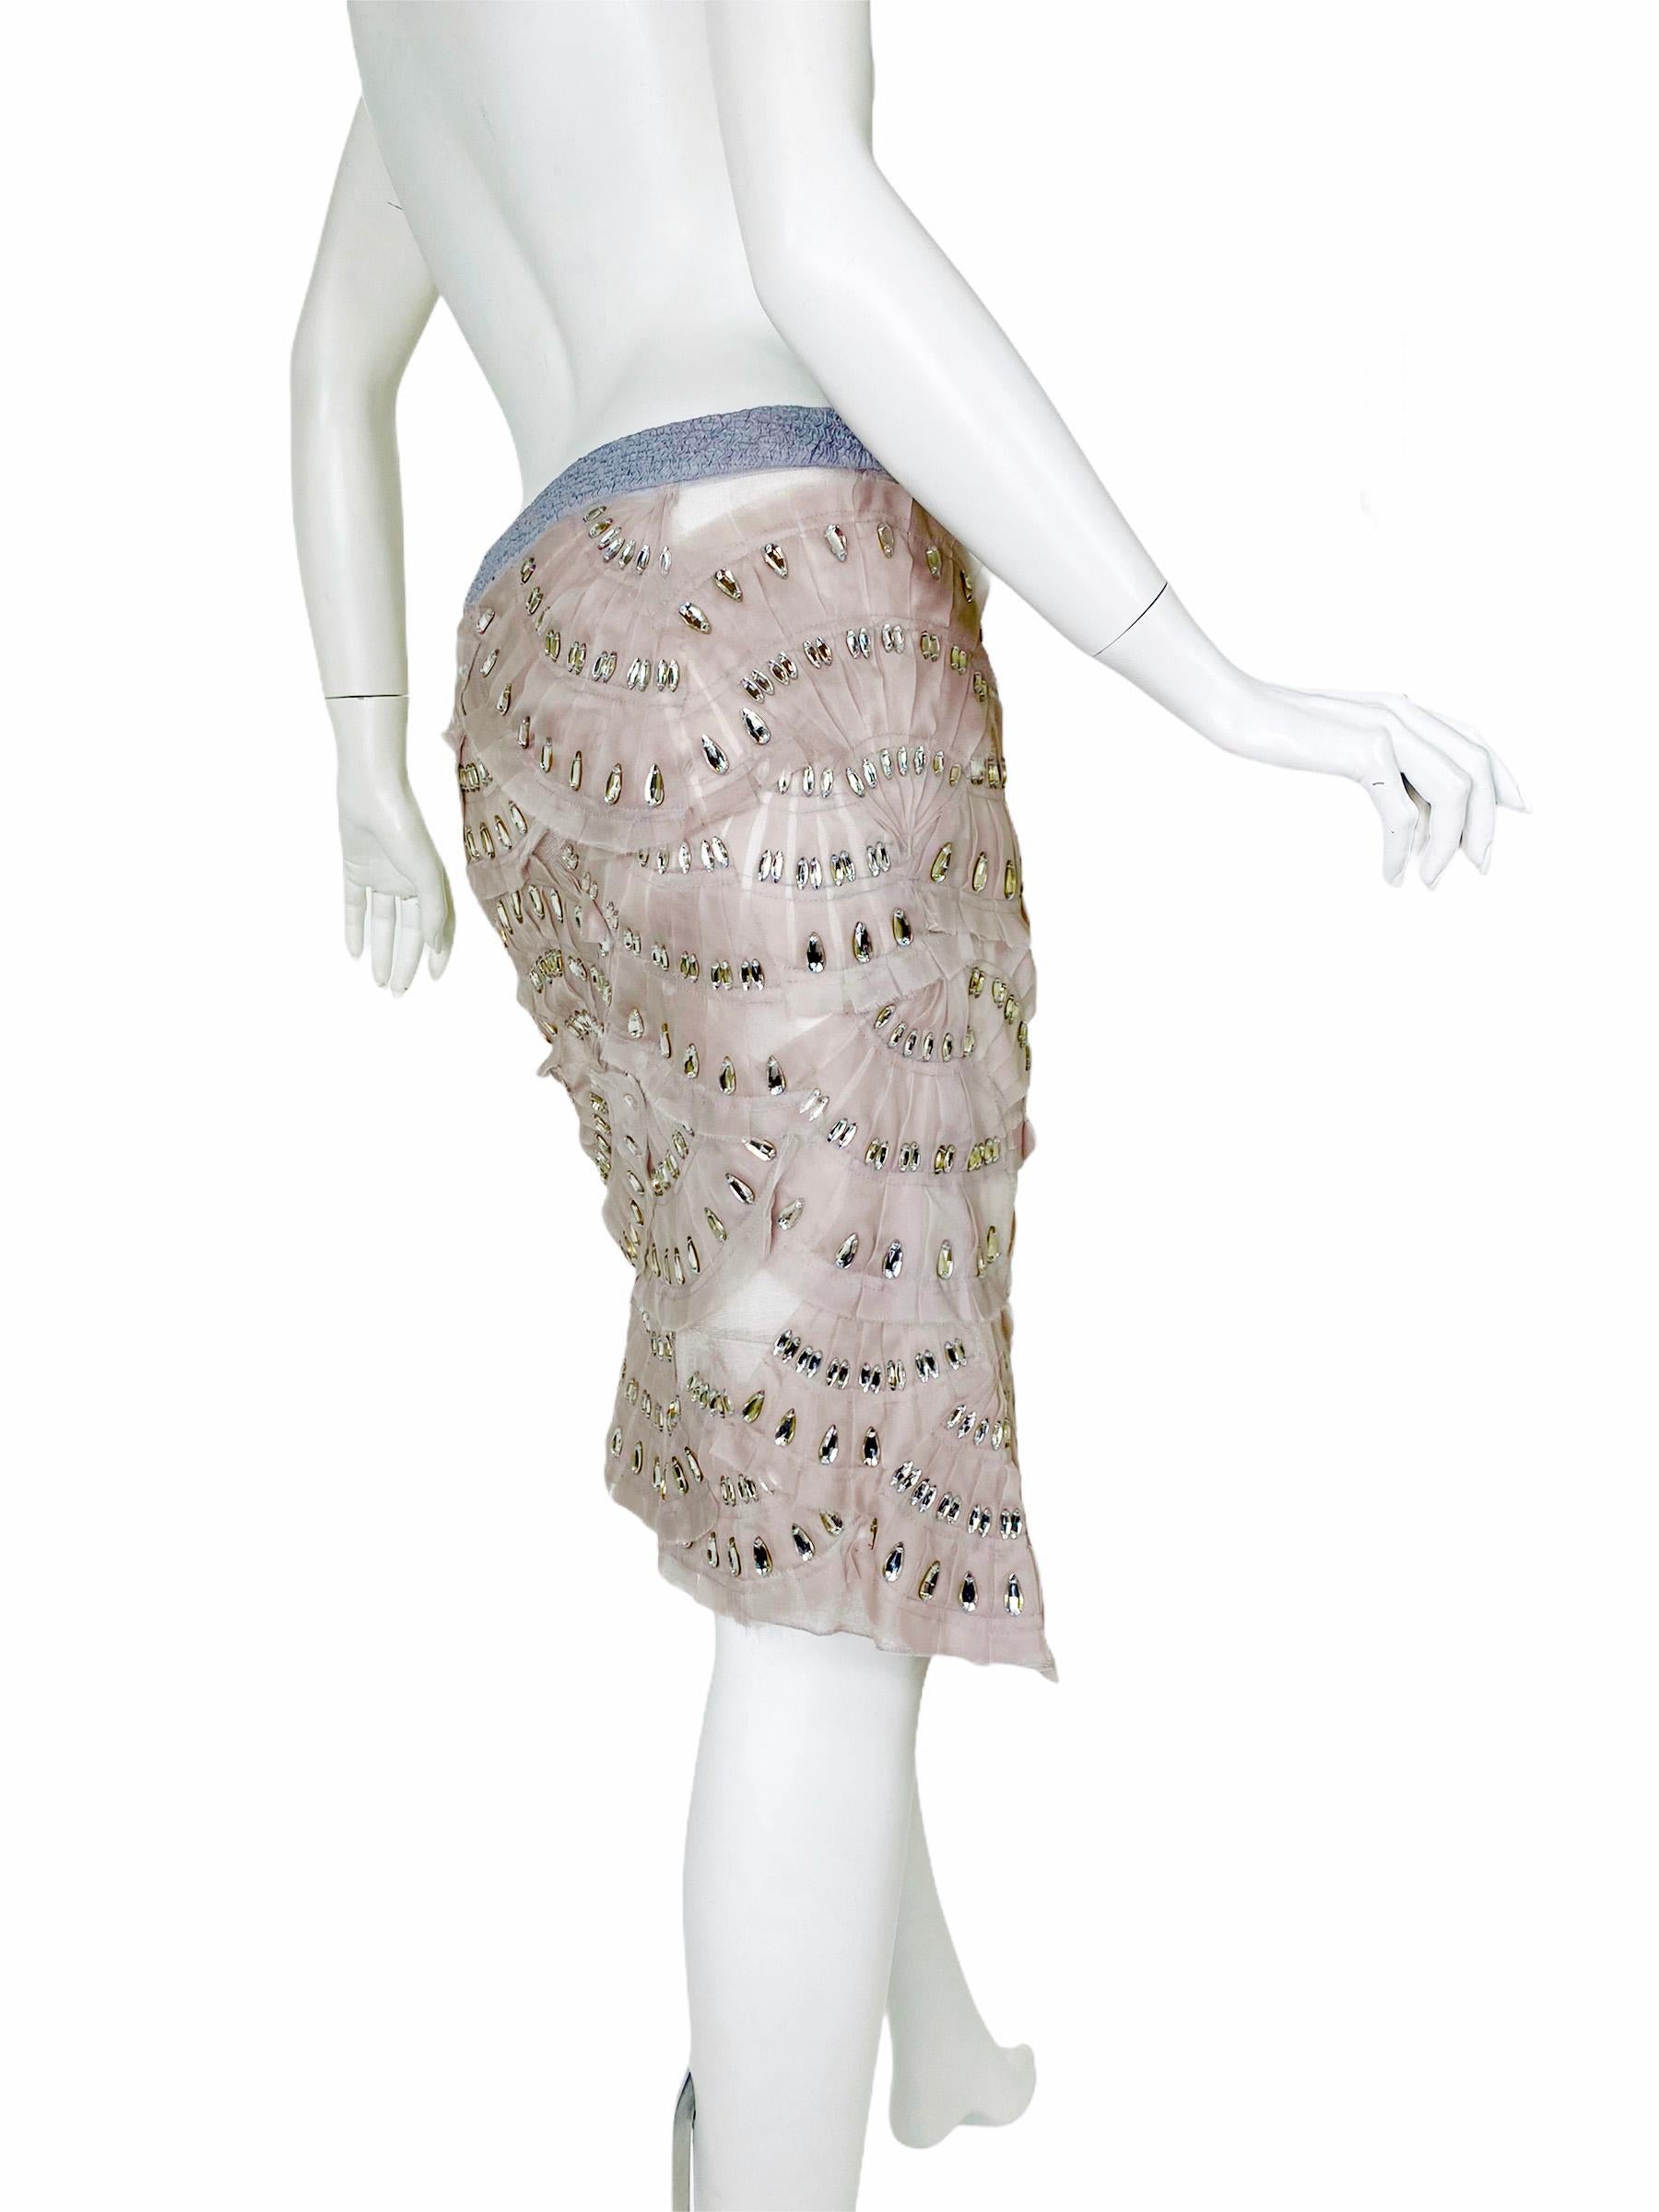 Tom Ford for Gucci Crystal Embellished Skirt, S/S 2004  2